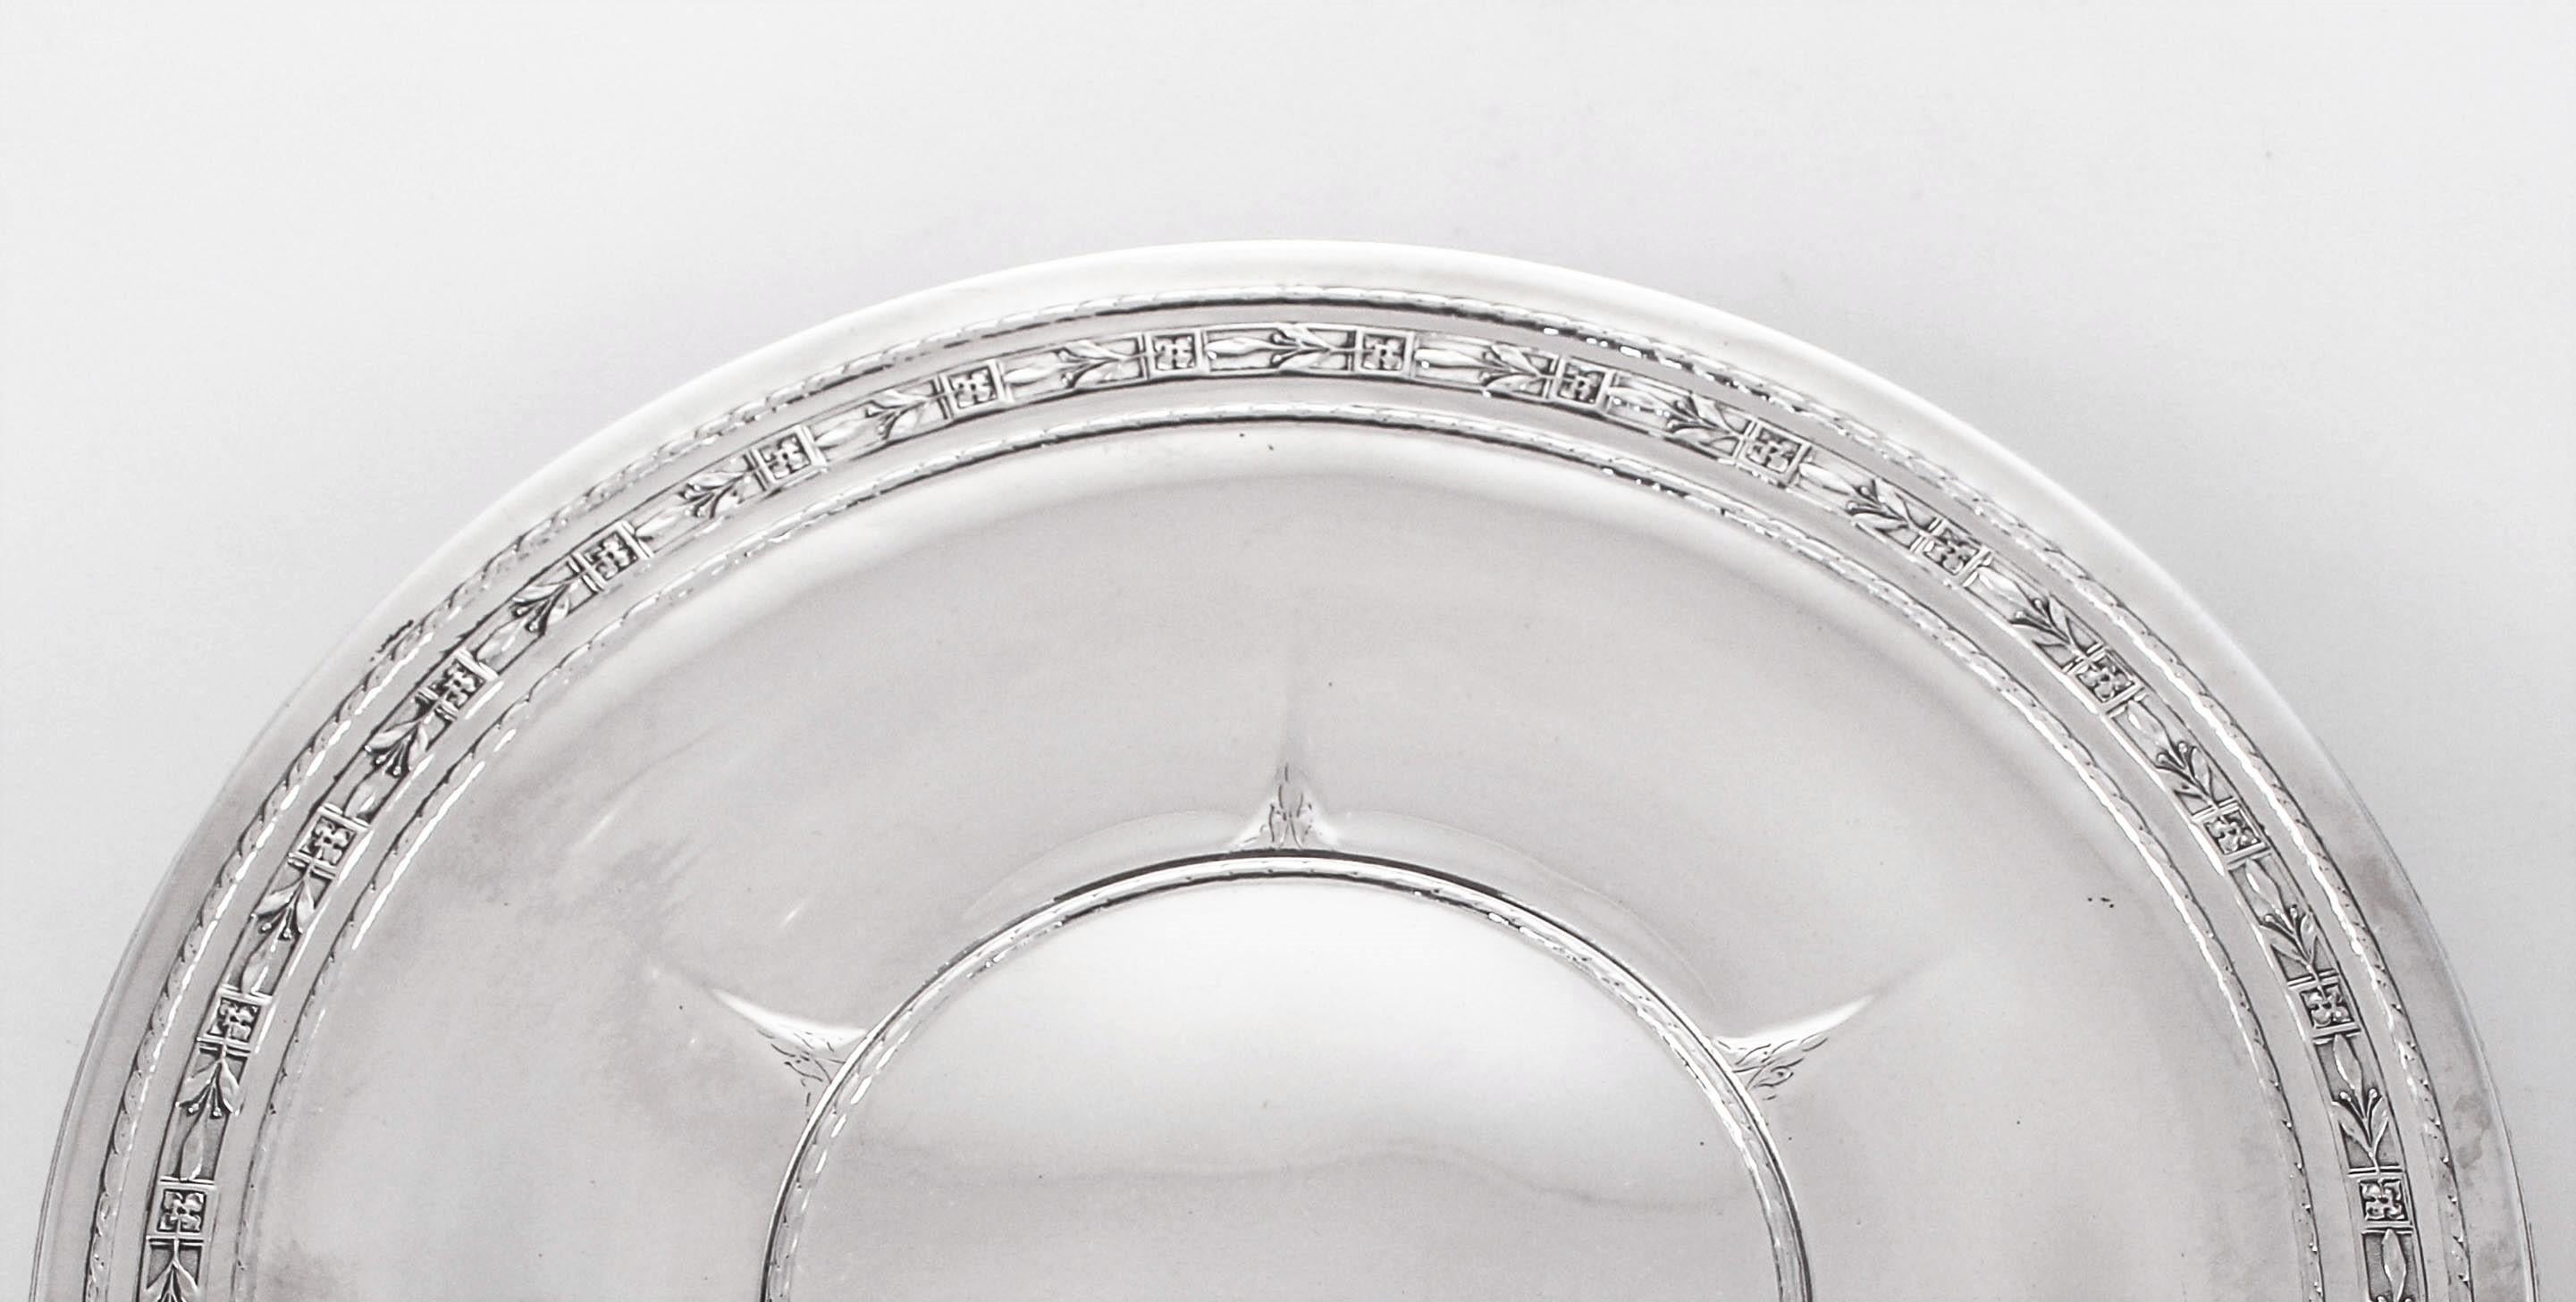 We are delighted to offer this sterling silver dish by William Durgin. It has a pretty border with a symmetrical design. It stands on a center pedestal - not weighted, that has the same symmetrical design. In the center of the tray there is a